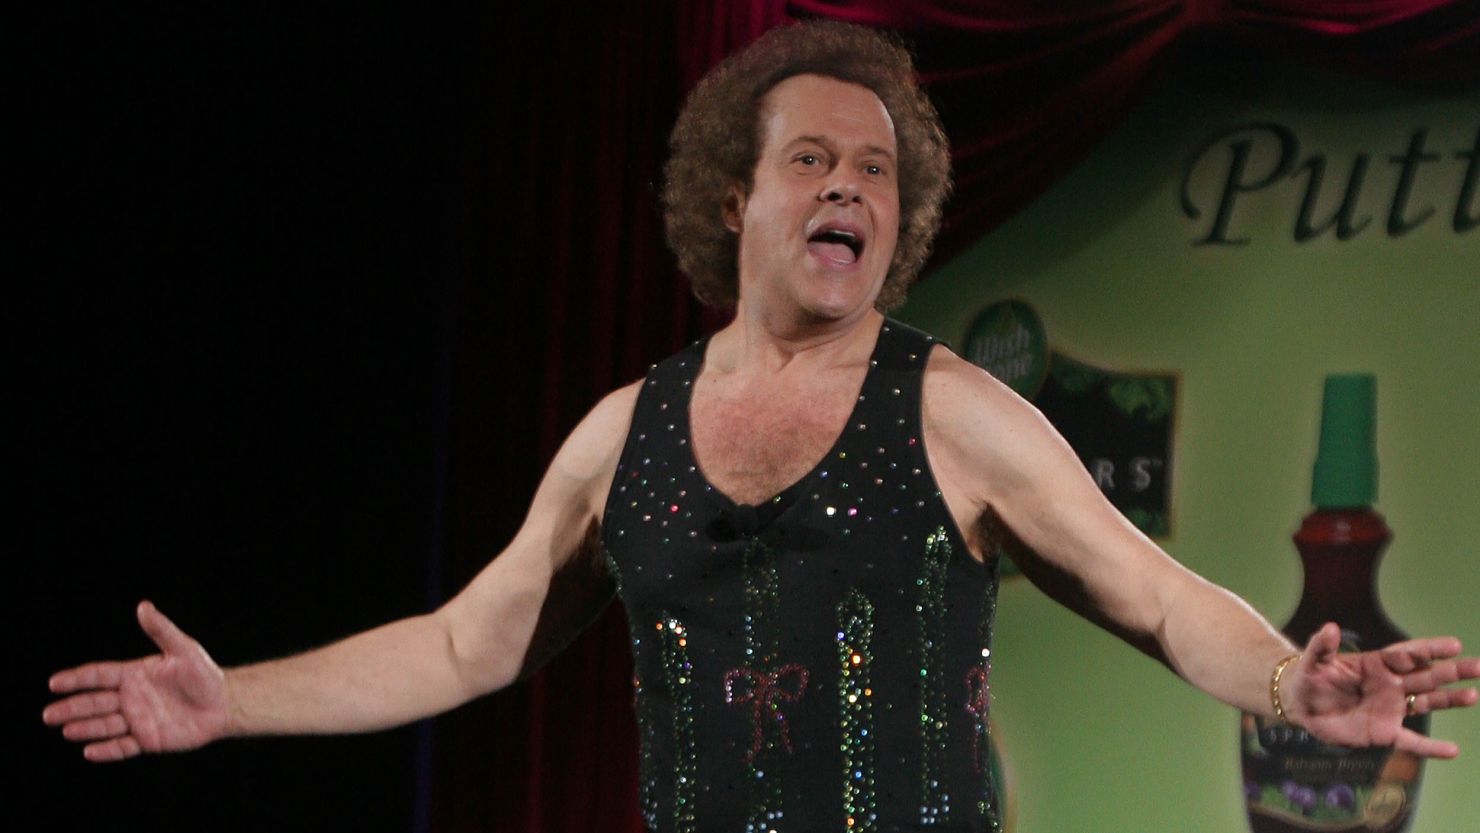 Richard Simmons speaking at an event in New York in 2006.